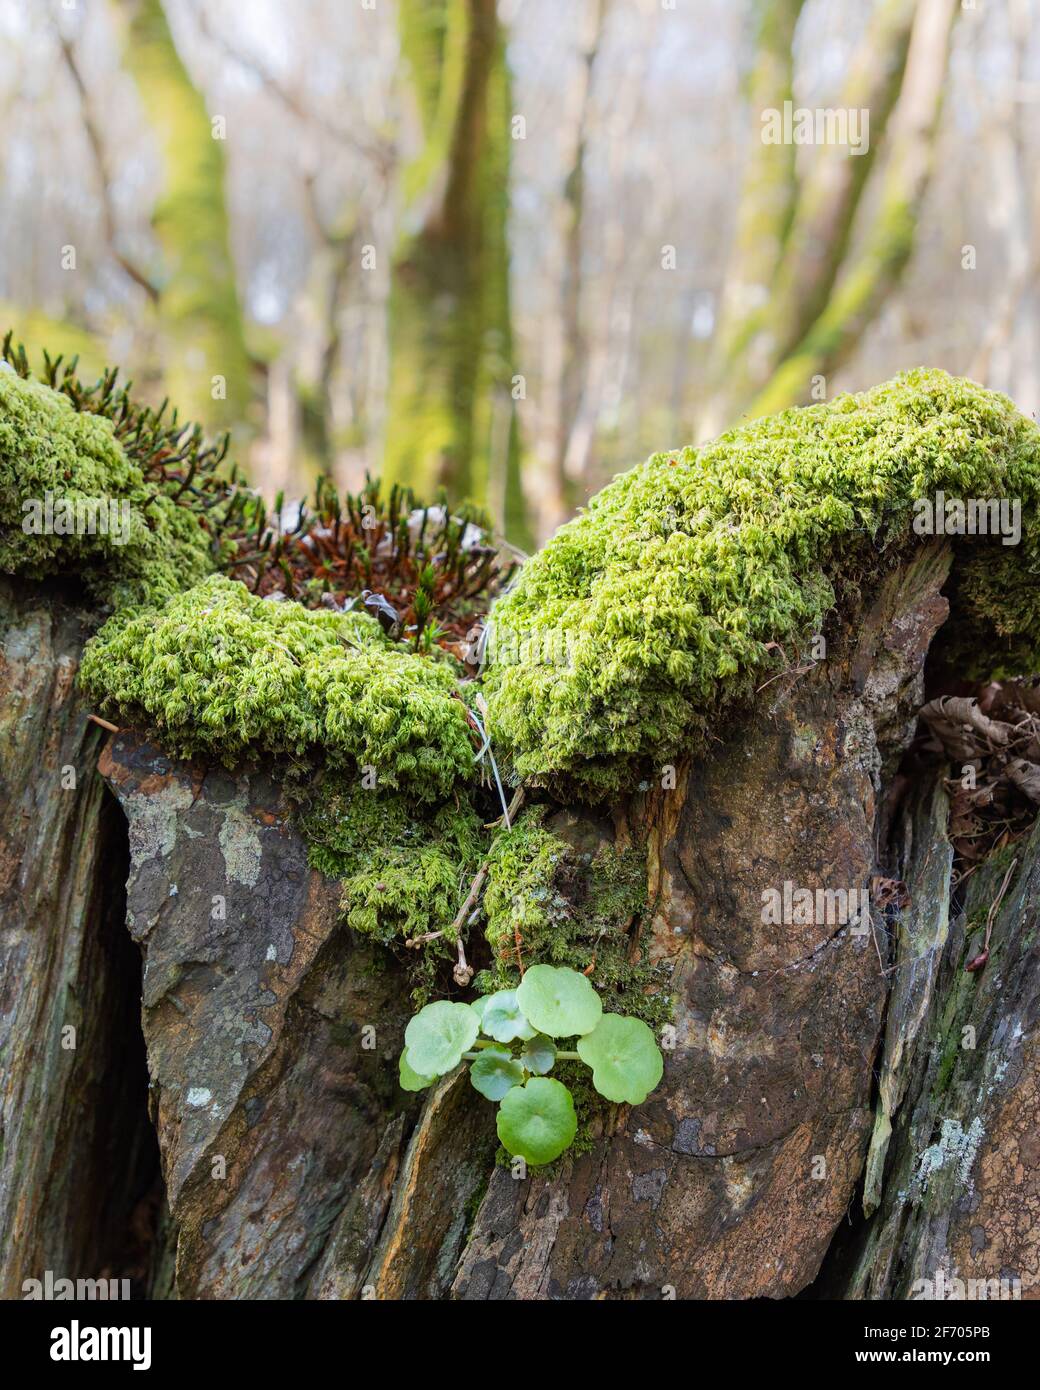 Barmouth, Gwynedd, Wales, UK - April 9th 2019: Larger Mouse-tail moss and Marsh Pennywort growing on a stone wall in Welsh woodland. Stock Photo